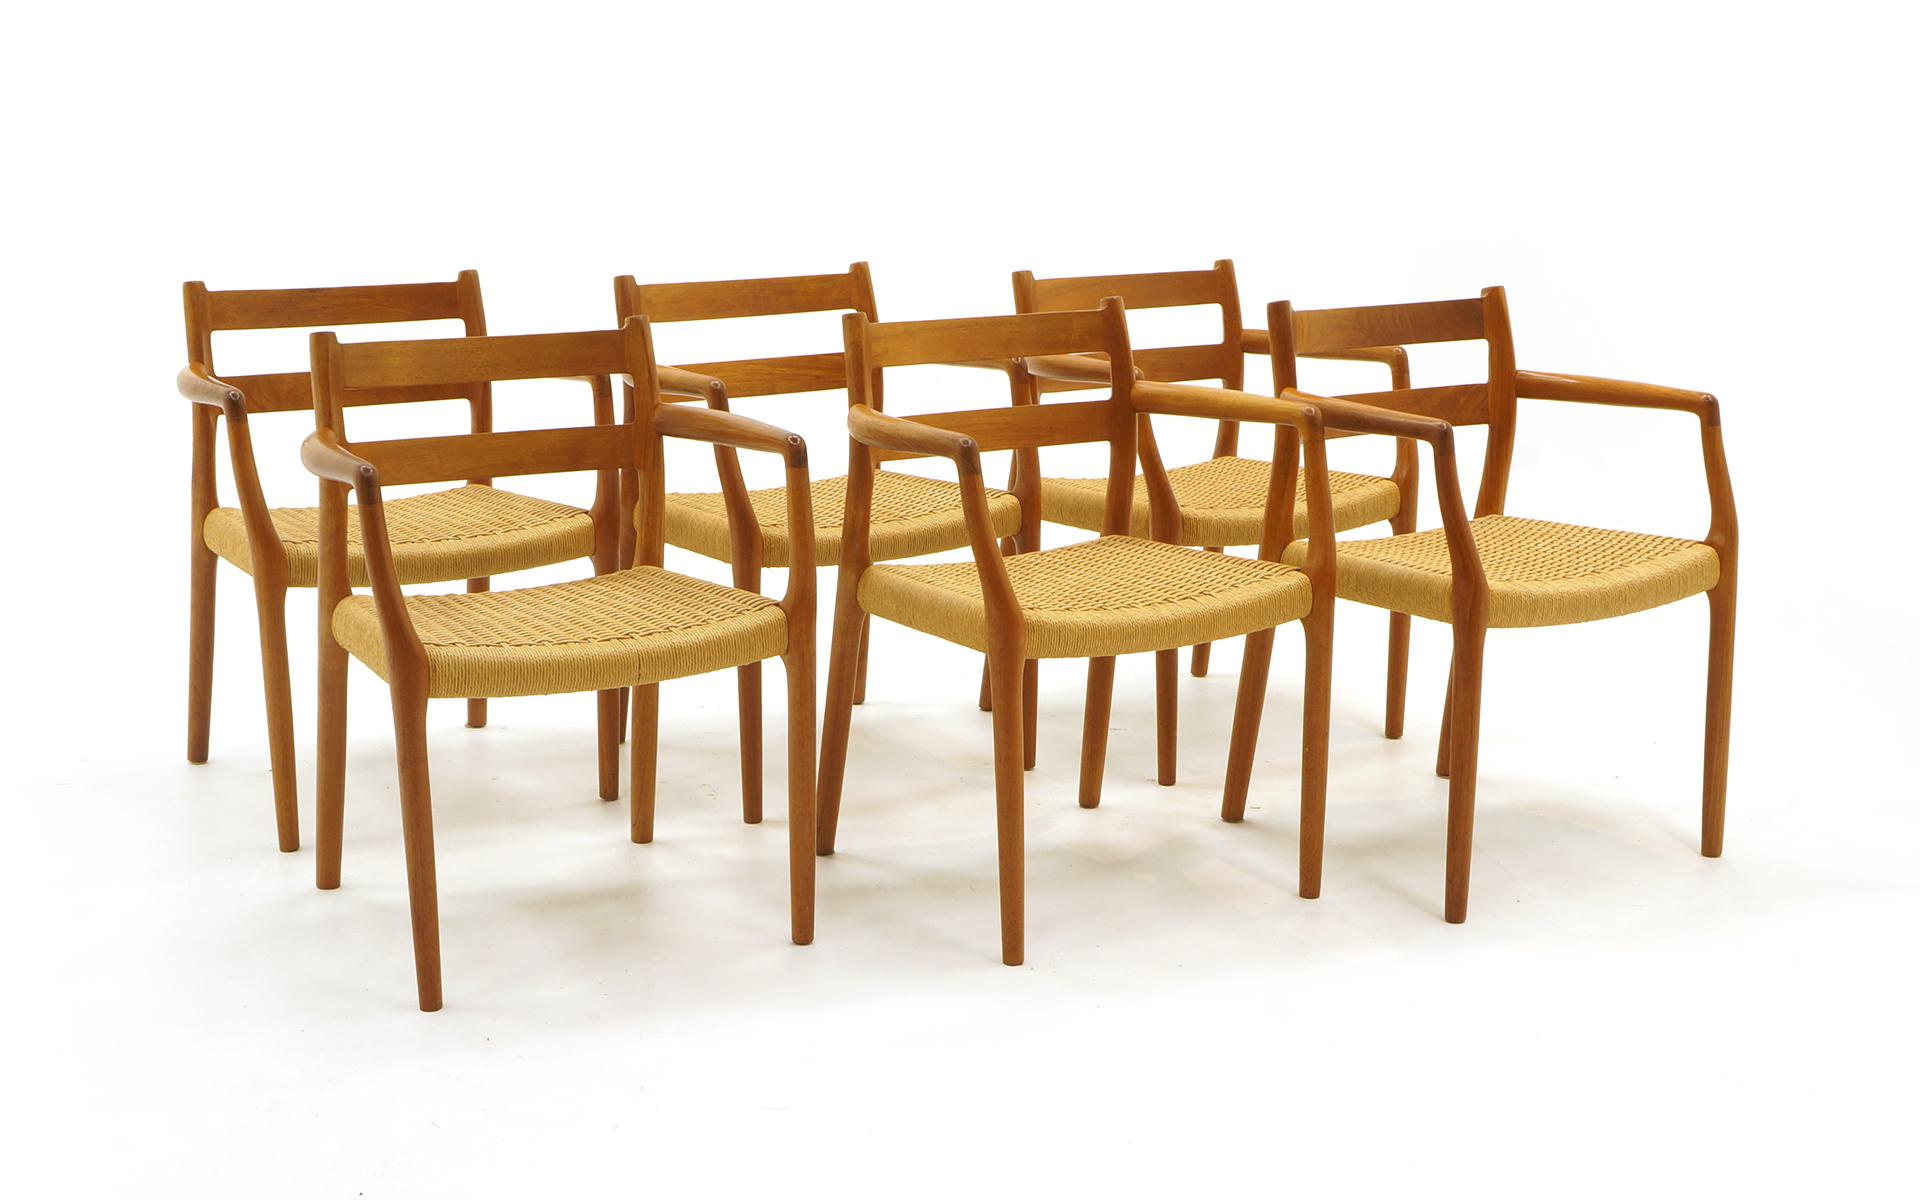 Set of 6 Danish modern teak dining chairs, all armchairs, by Moller. Original handwoven papercord seats. All in very good original condition. Ready to use.